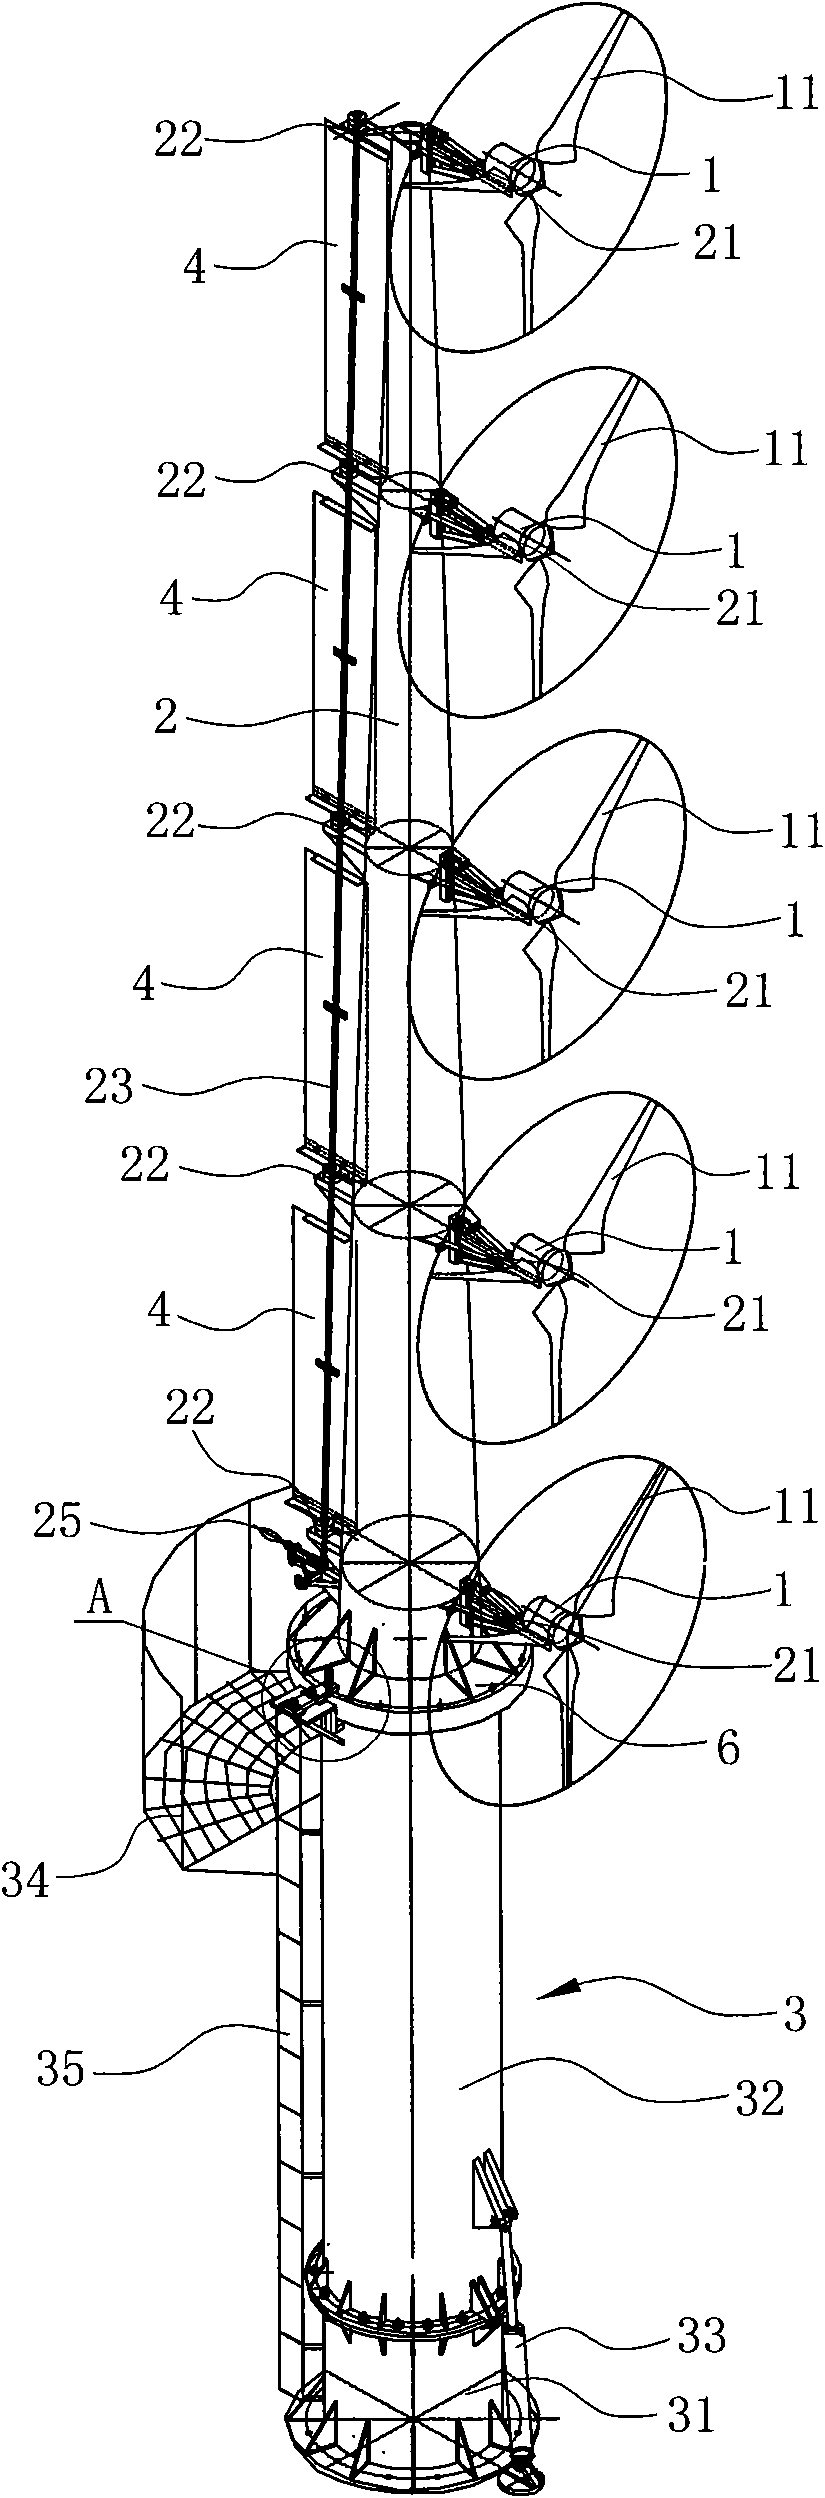 Combined generating device with multiple wind driven generators